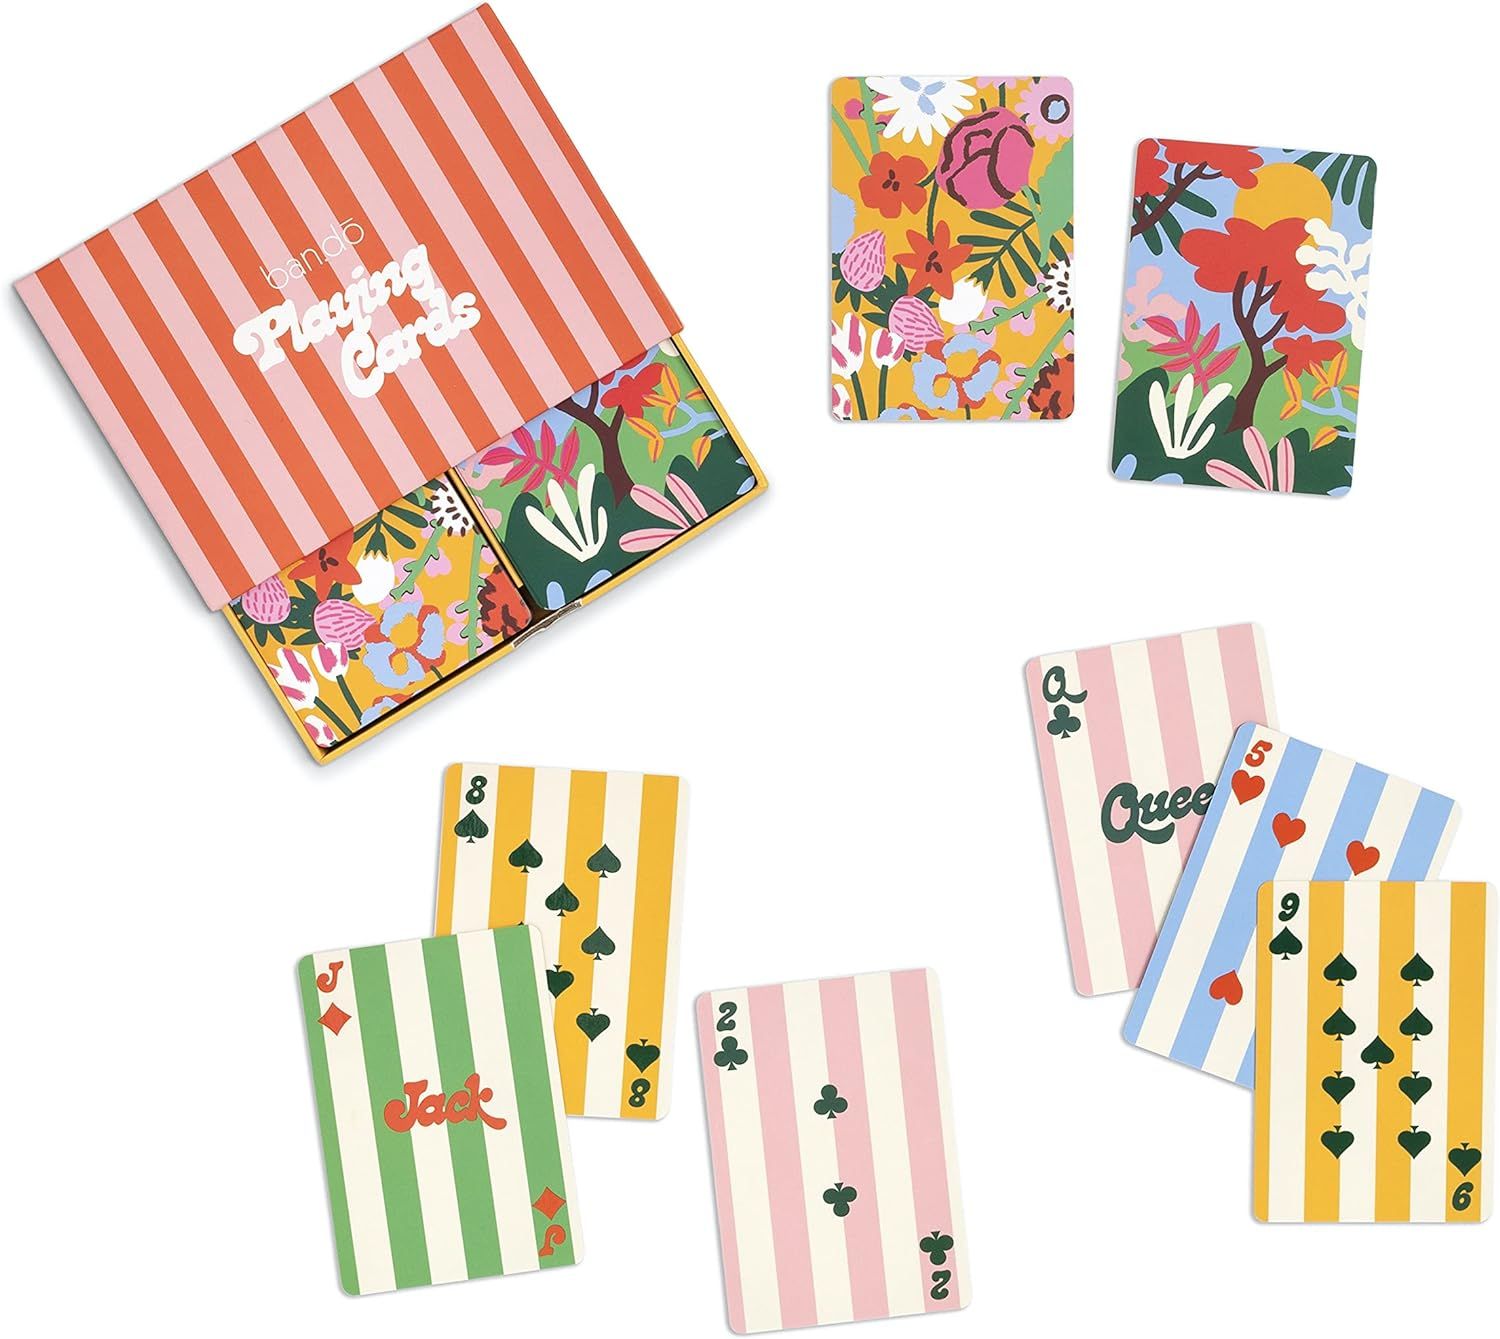 ban.do 2 Decks of Playing Cards, Cute 52-Count Standard Card Deck with Case, Floral | Amazon (US)